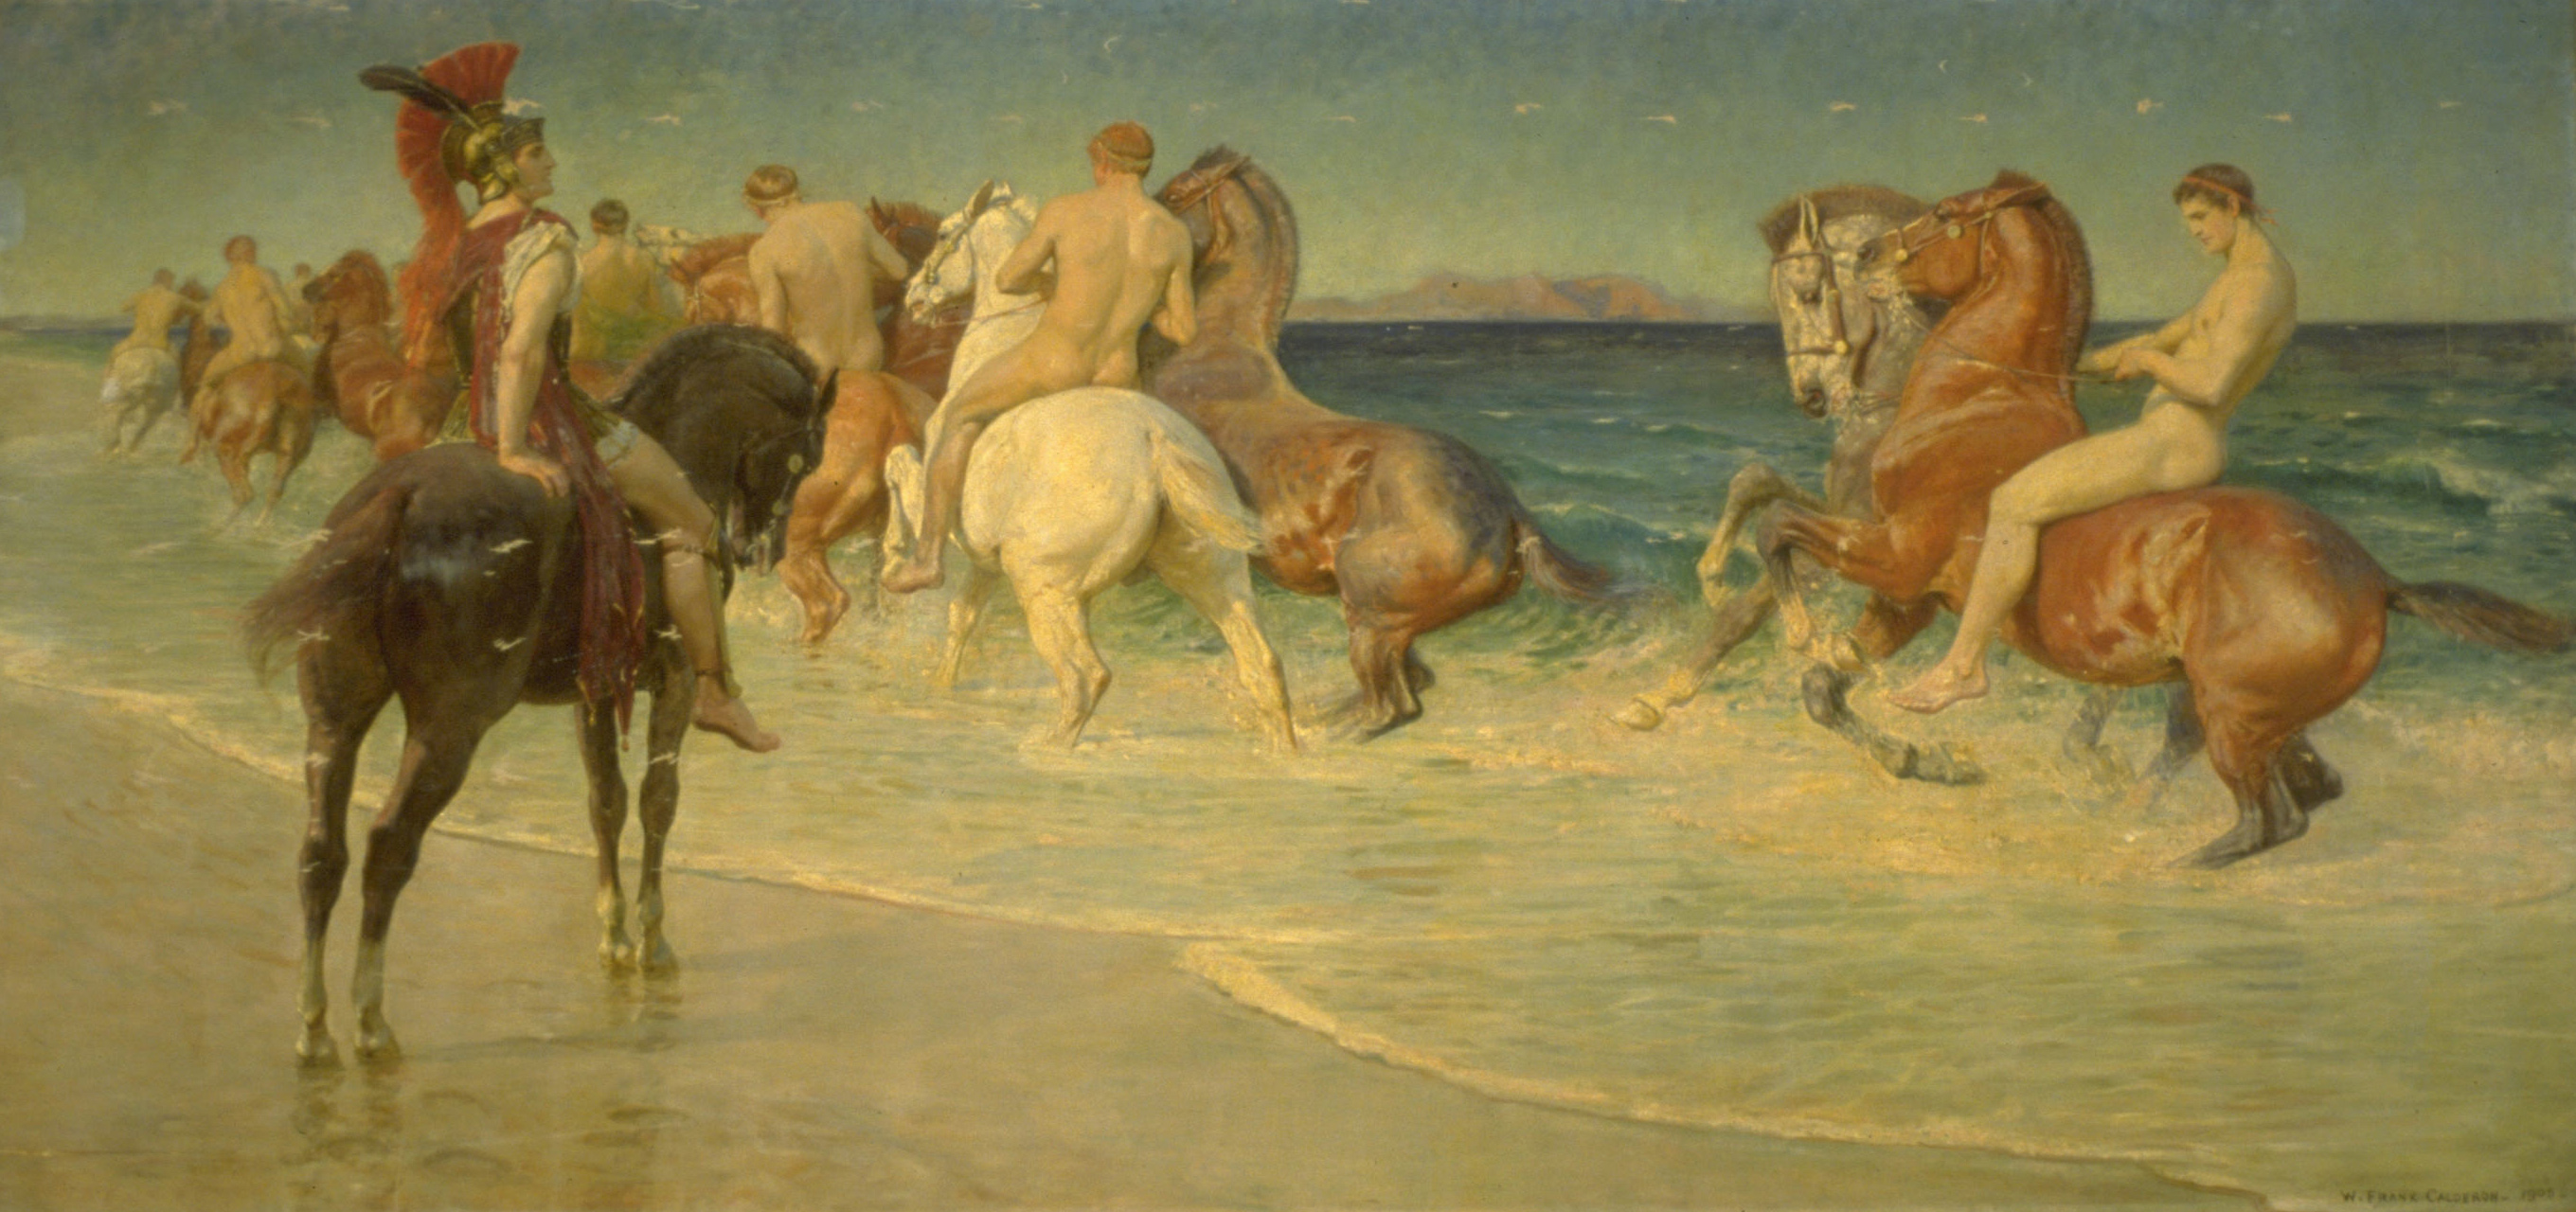 <p><strong>William Calderon</strong>&nbsp;<br />
<em>On the Sea-Beat Shore, Where Thracians Tame Wild Horses from Alexander Pope, Homer&#39;s Iliad</em>&nbsp;1905<br />
Mackelvie Trust Collection, Auckland Art Gallery Toi o Tāmaki</p>
